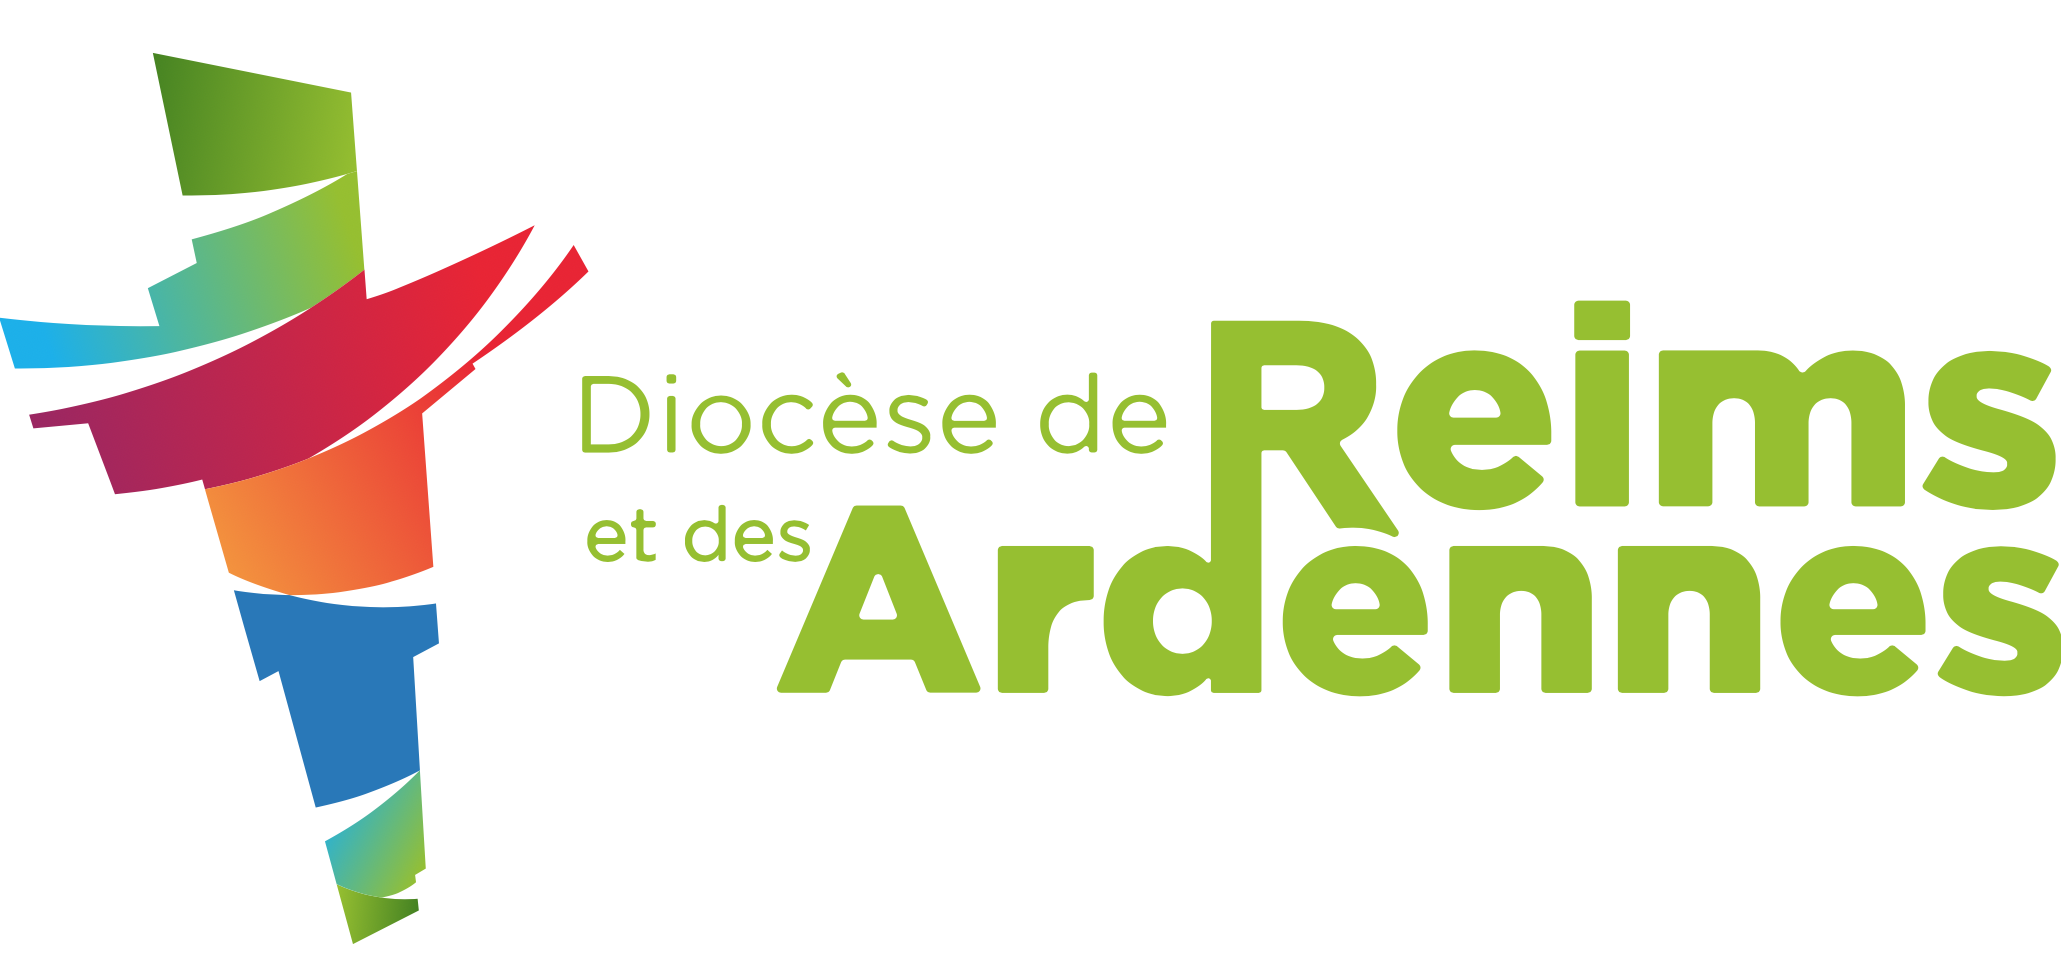 logo diocese Reims